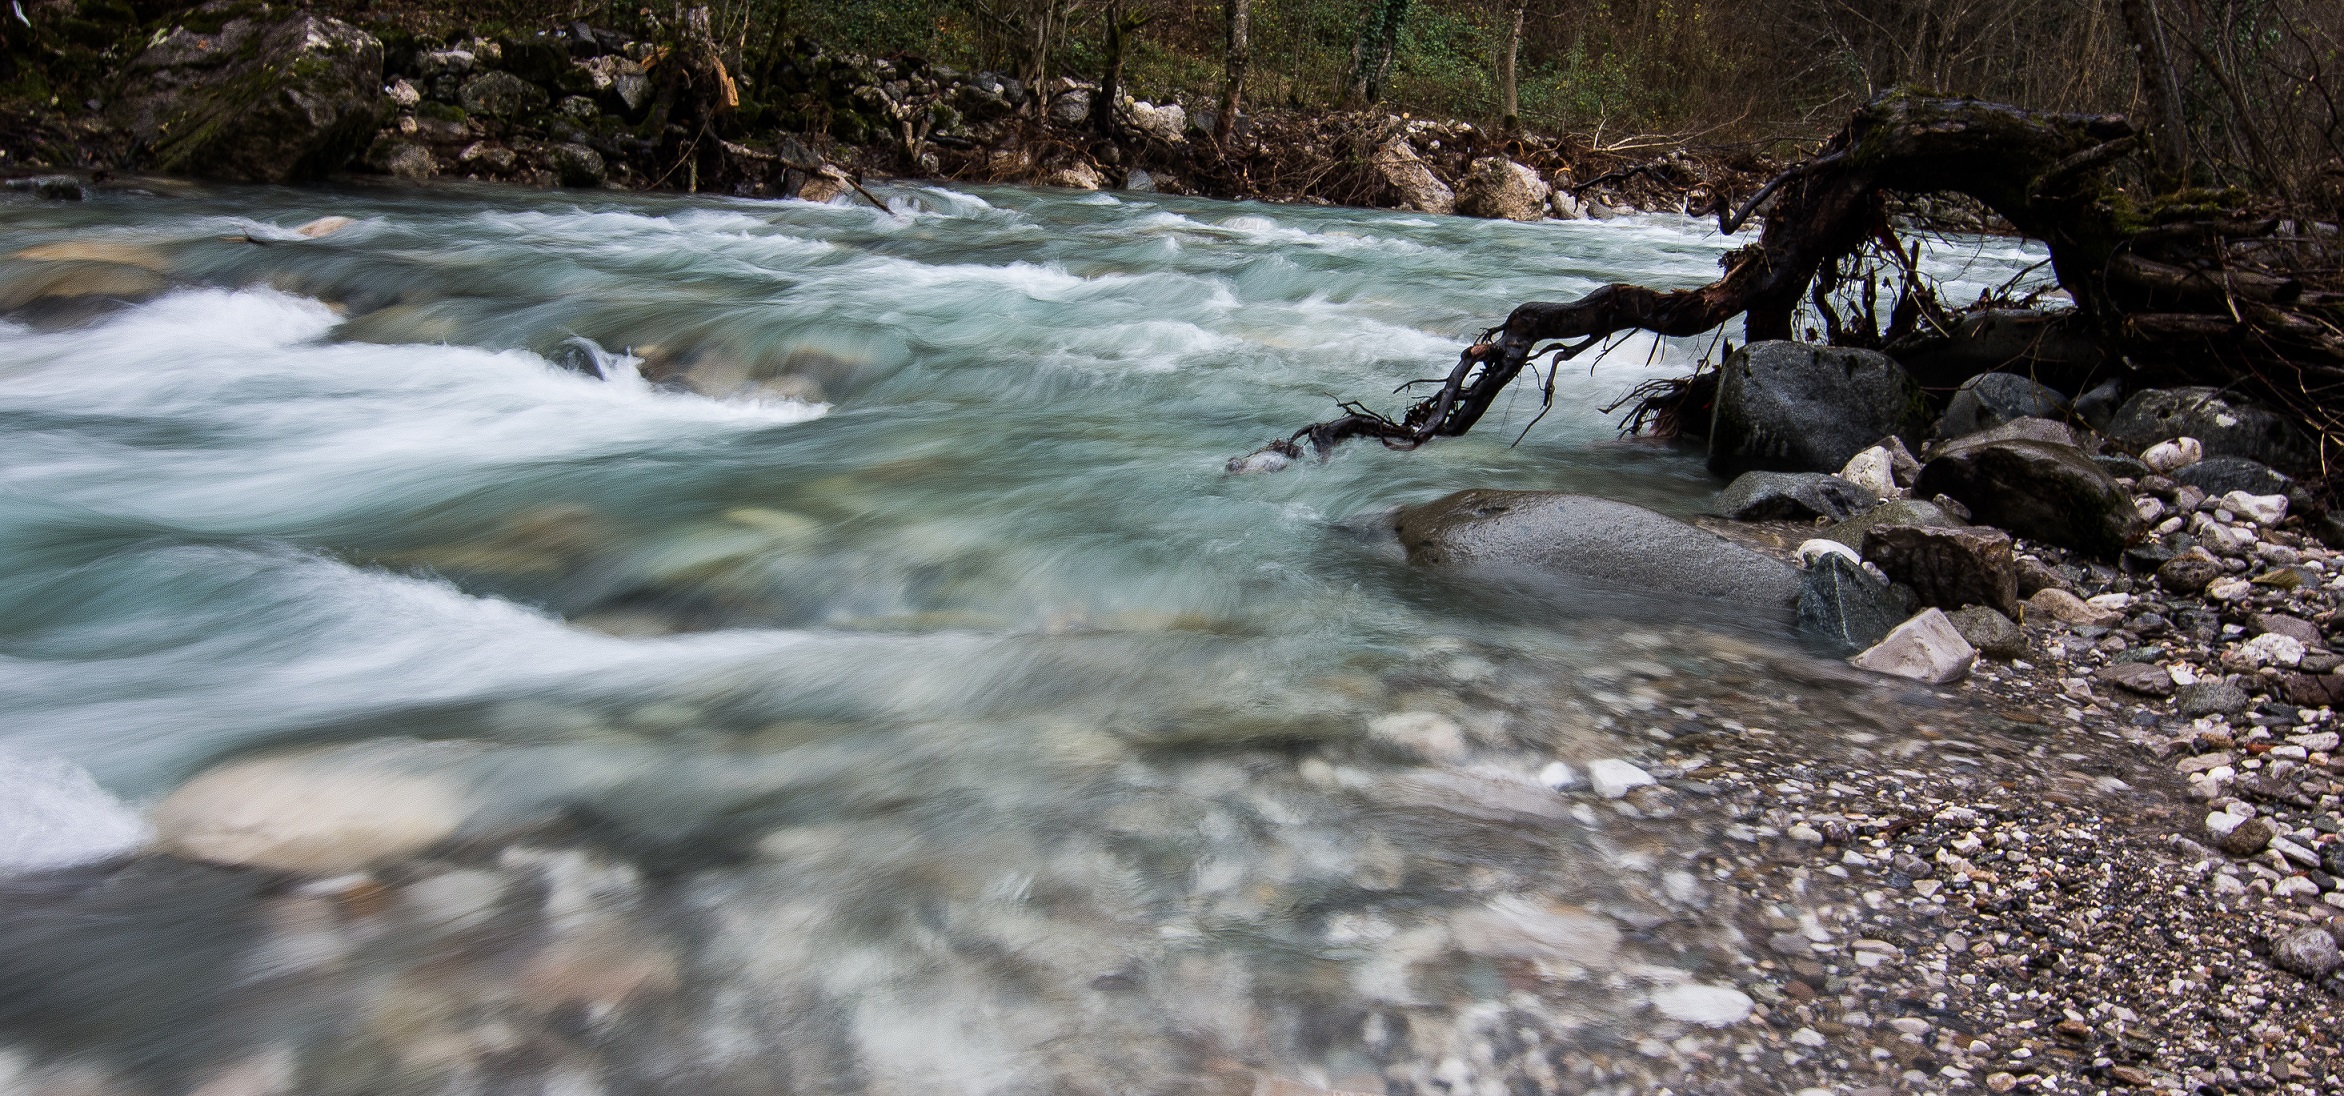 The Doljanka river in Bosnia and Herzegovina is at risk. Sign the petition! © Anes Podic 